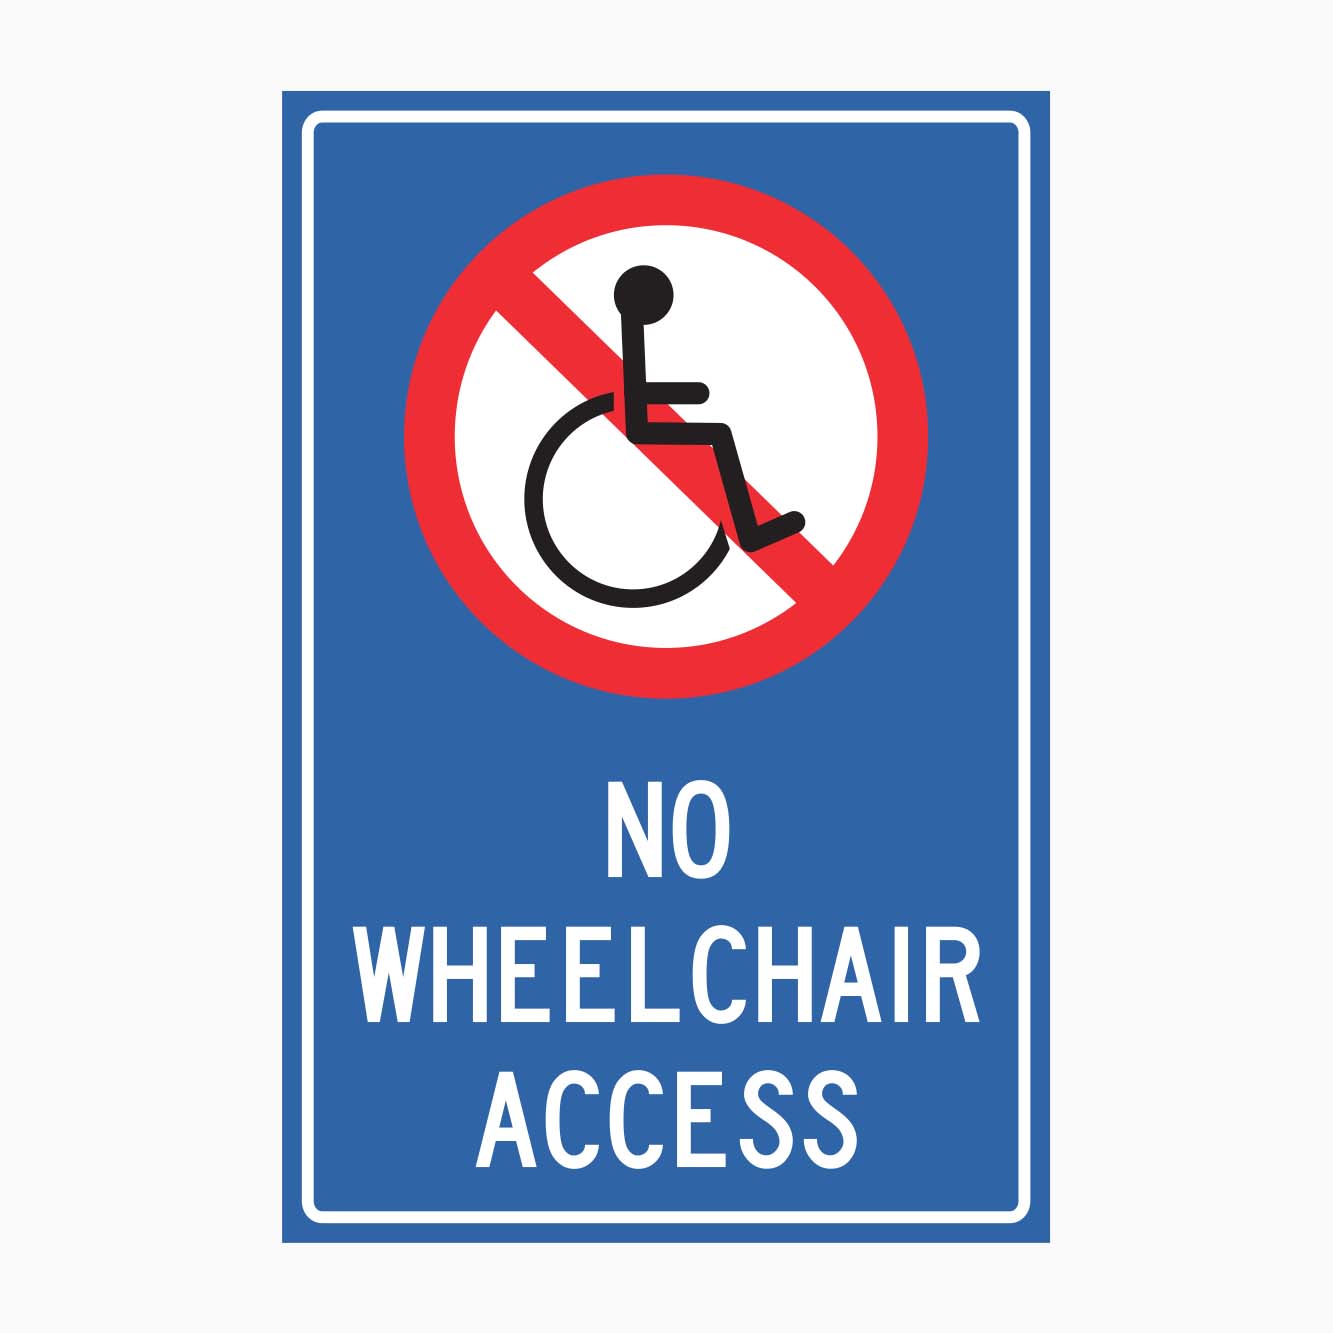 NO WHEELCHAIR ACCESS SIGN - GET SIGNS